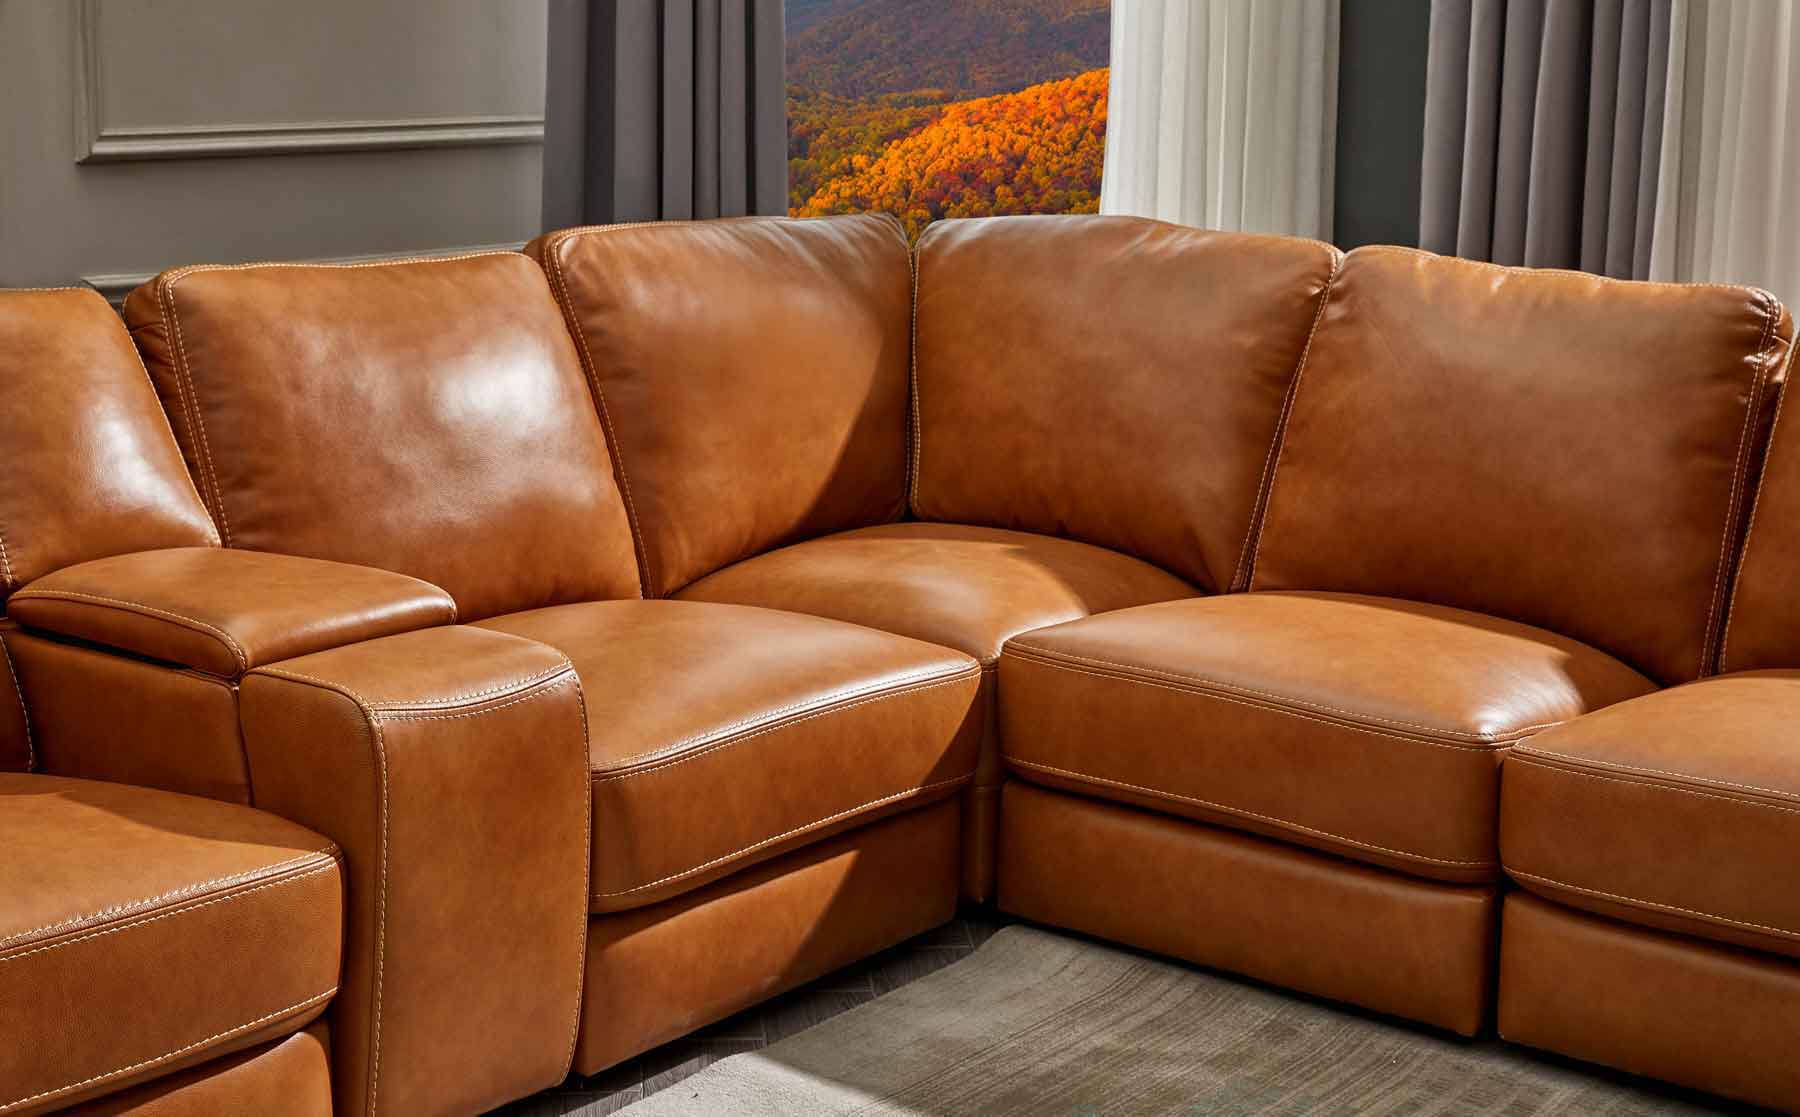 The Cheers Palomino Sectional Product